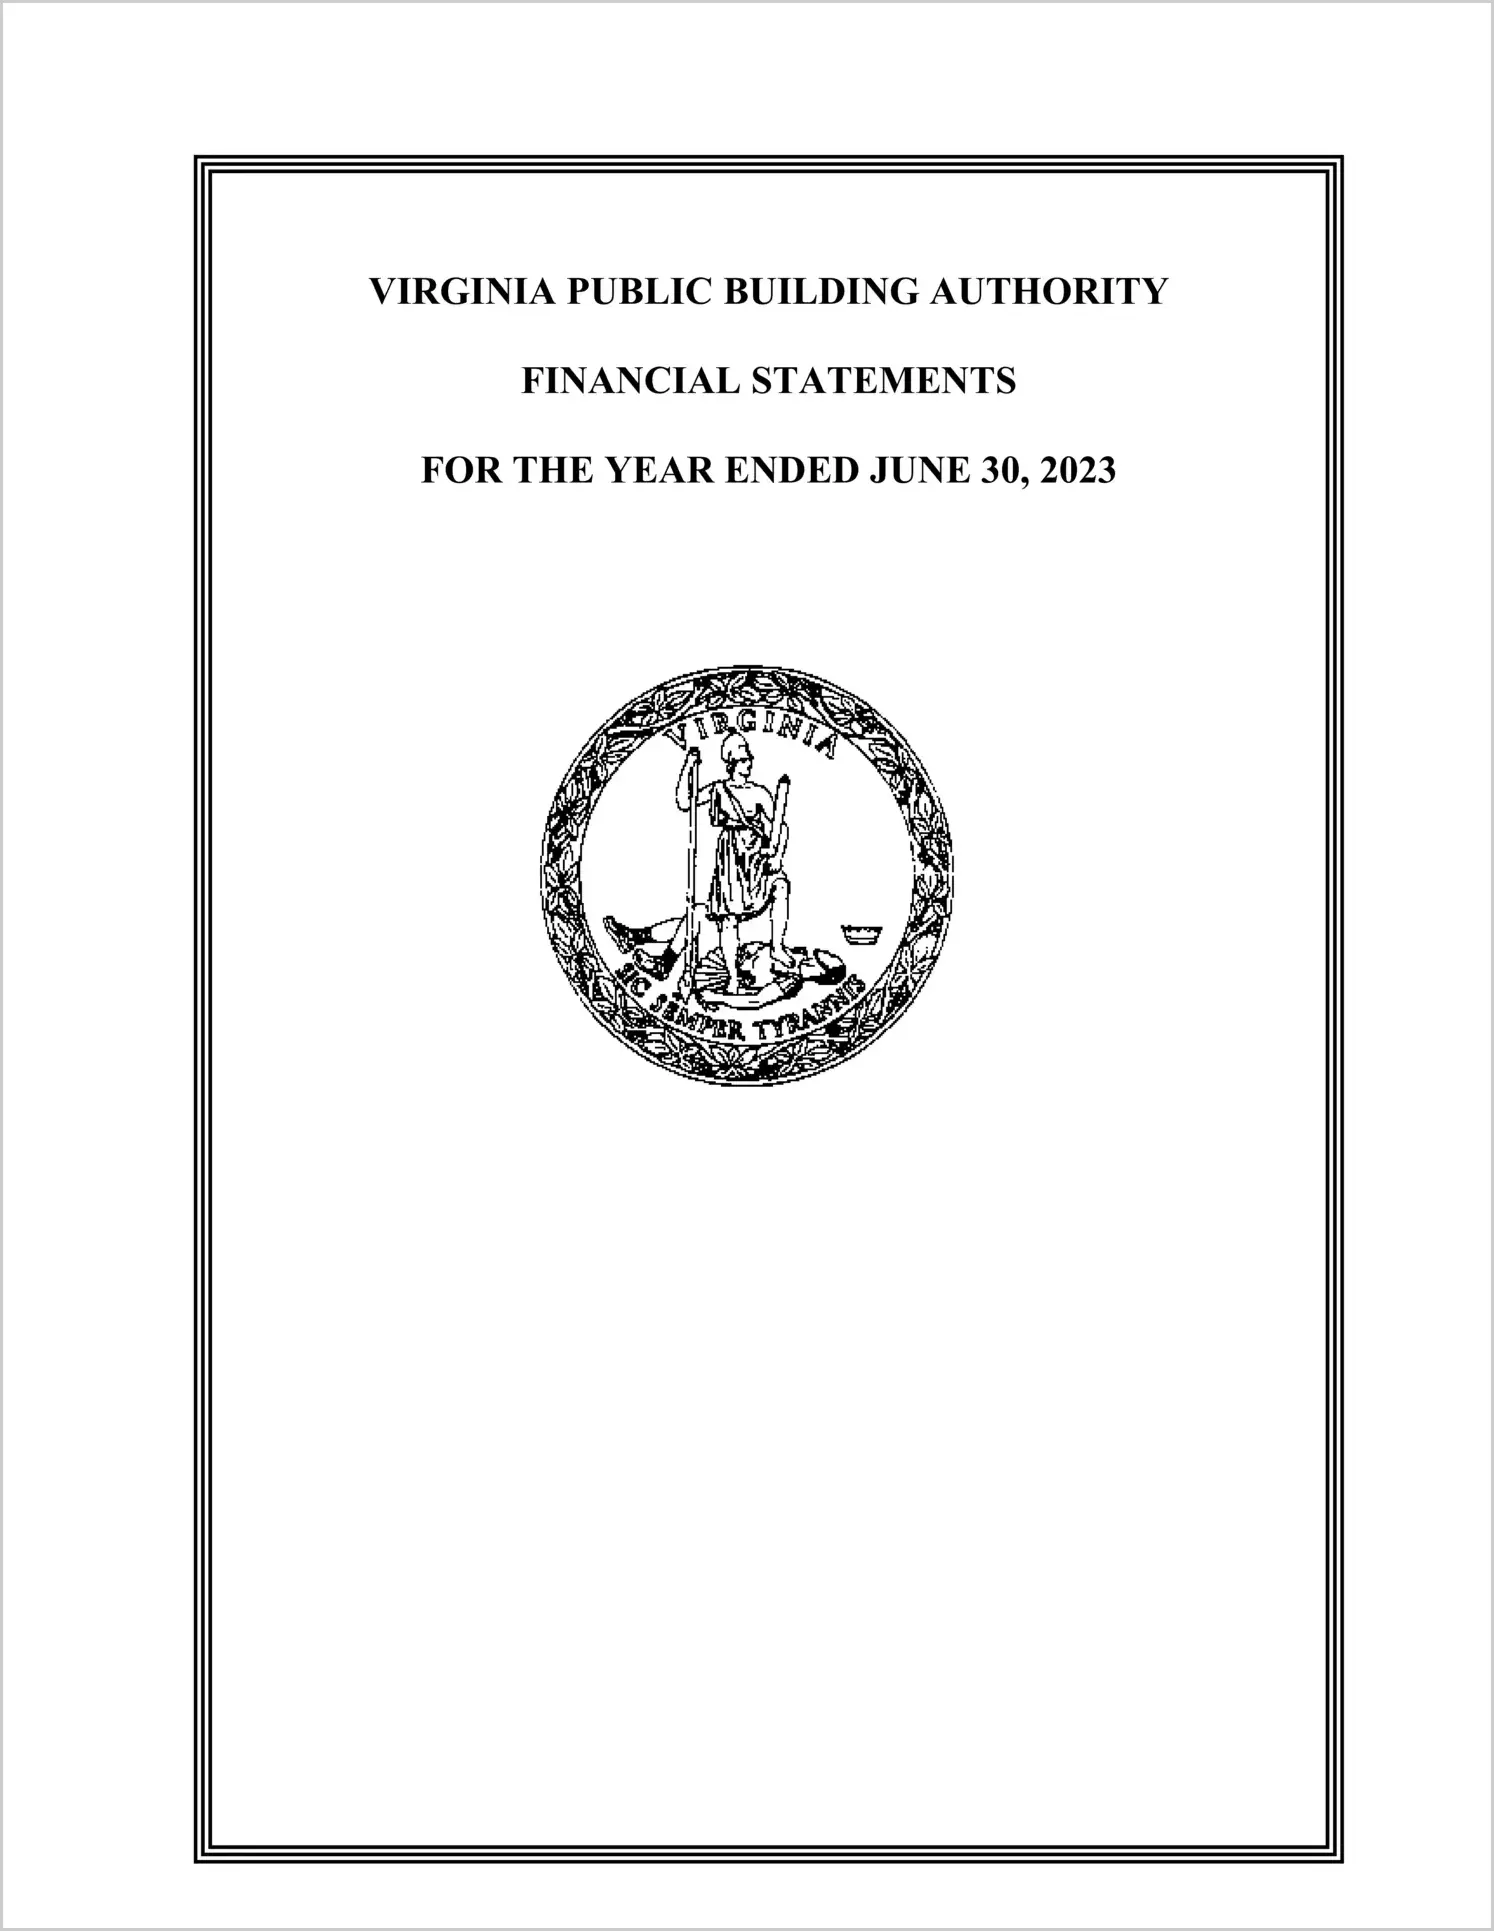 Virginia Public Building Authority Financial Statements for the year ended June 30, 2023